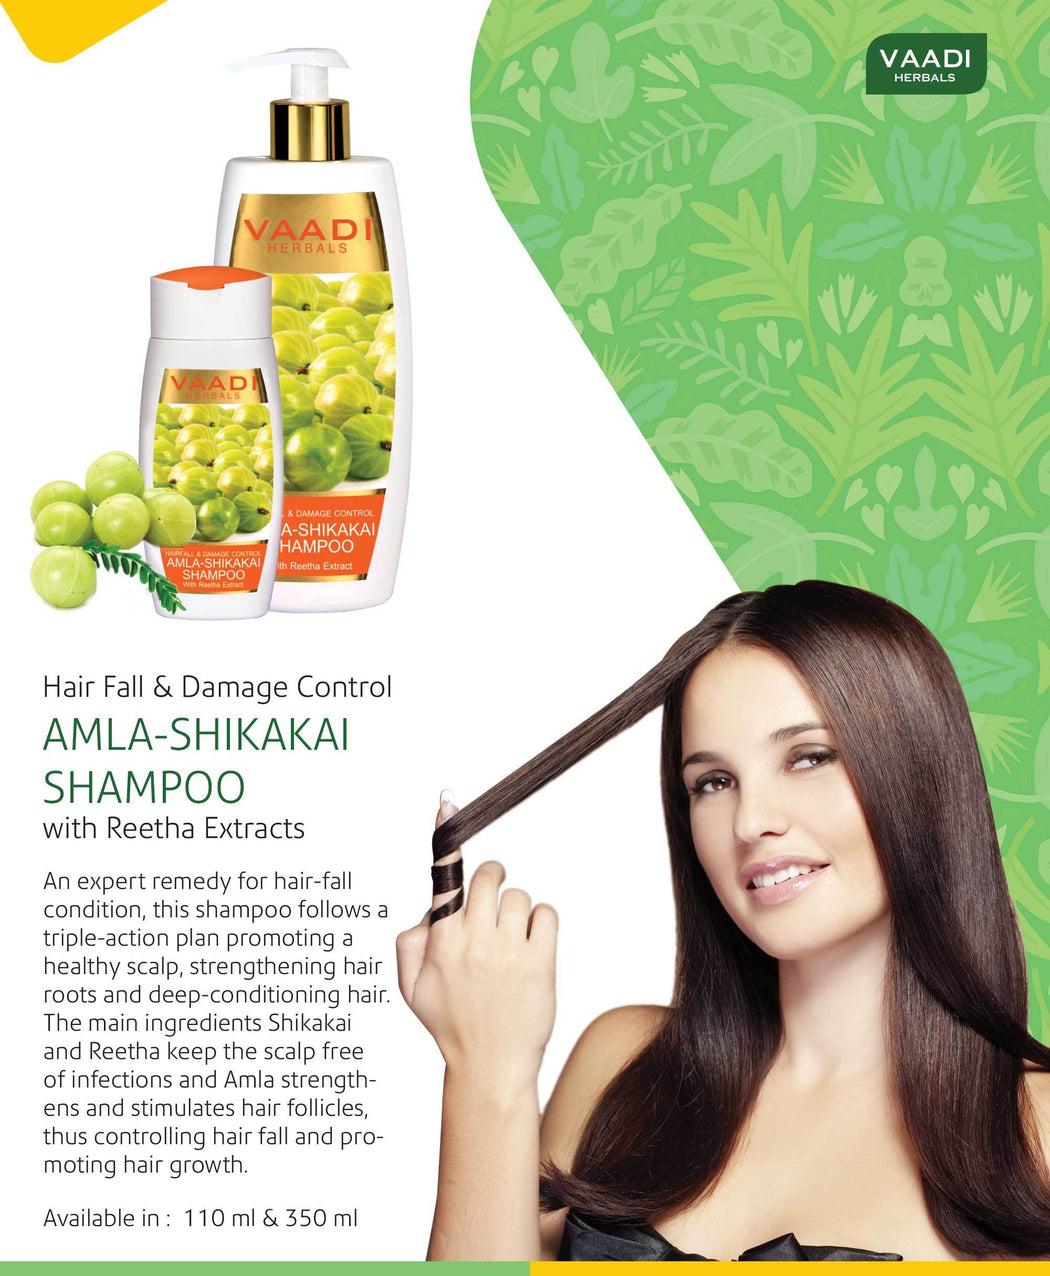 Hairfall & Damage Control Organic Shampoo (Indian Gooseberry Extract) - Promotes Hair Growth - Adds Shine to Hair (3 x 350 ml/12 fl oz)